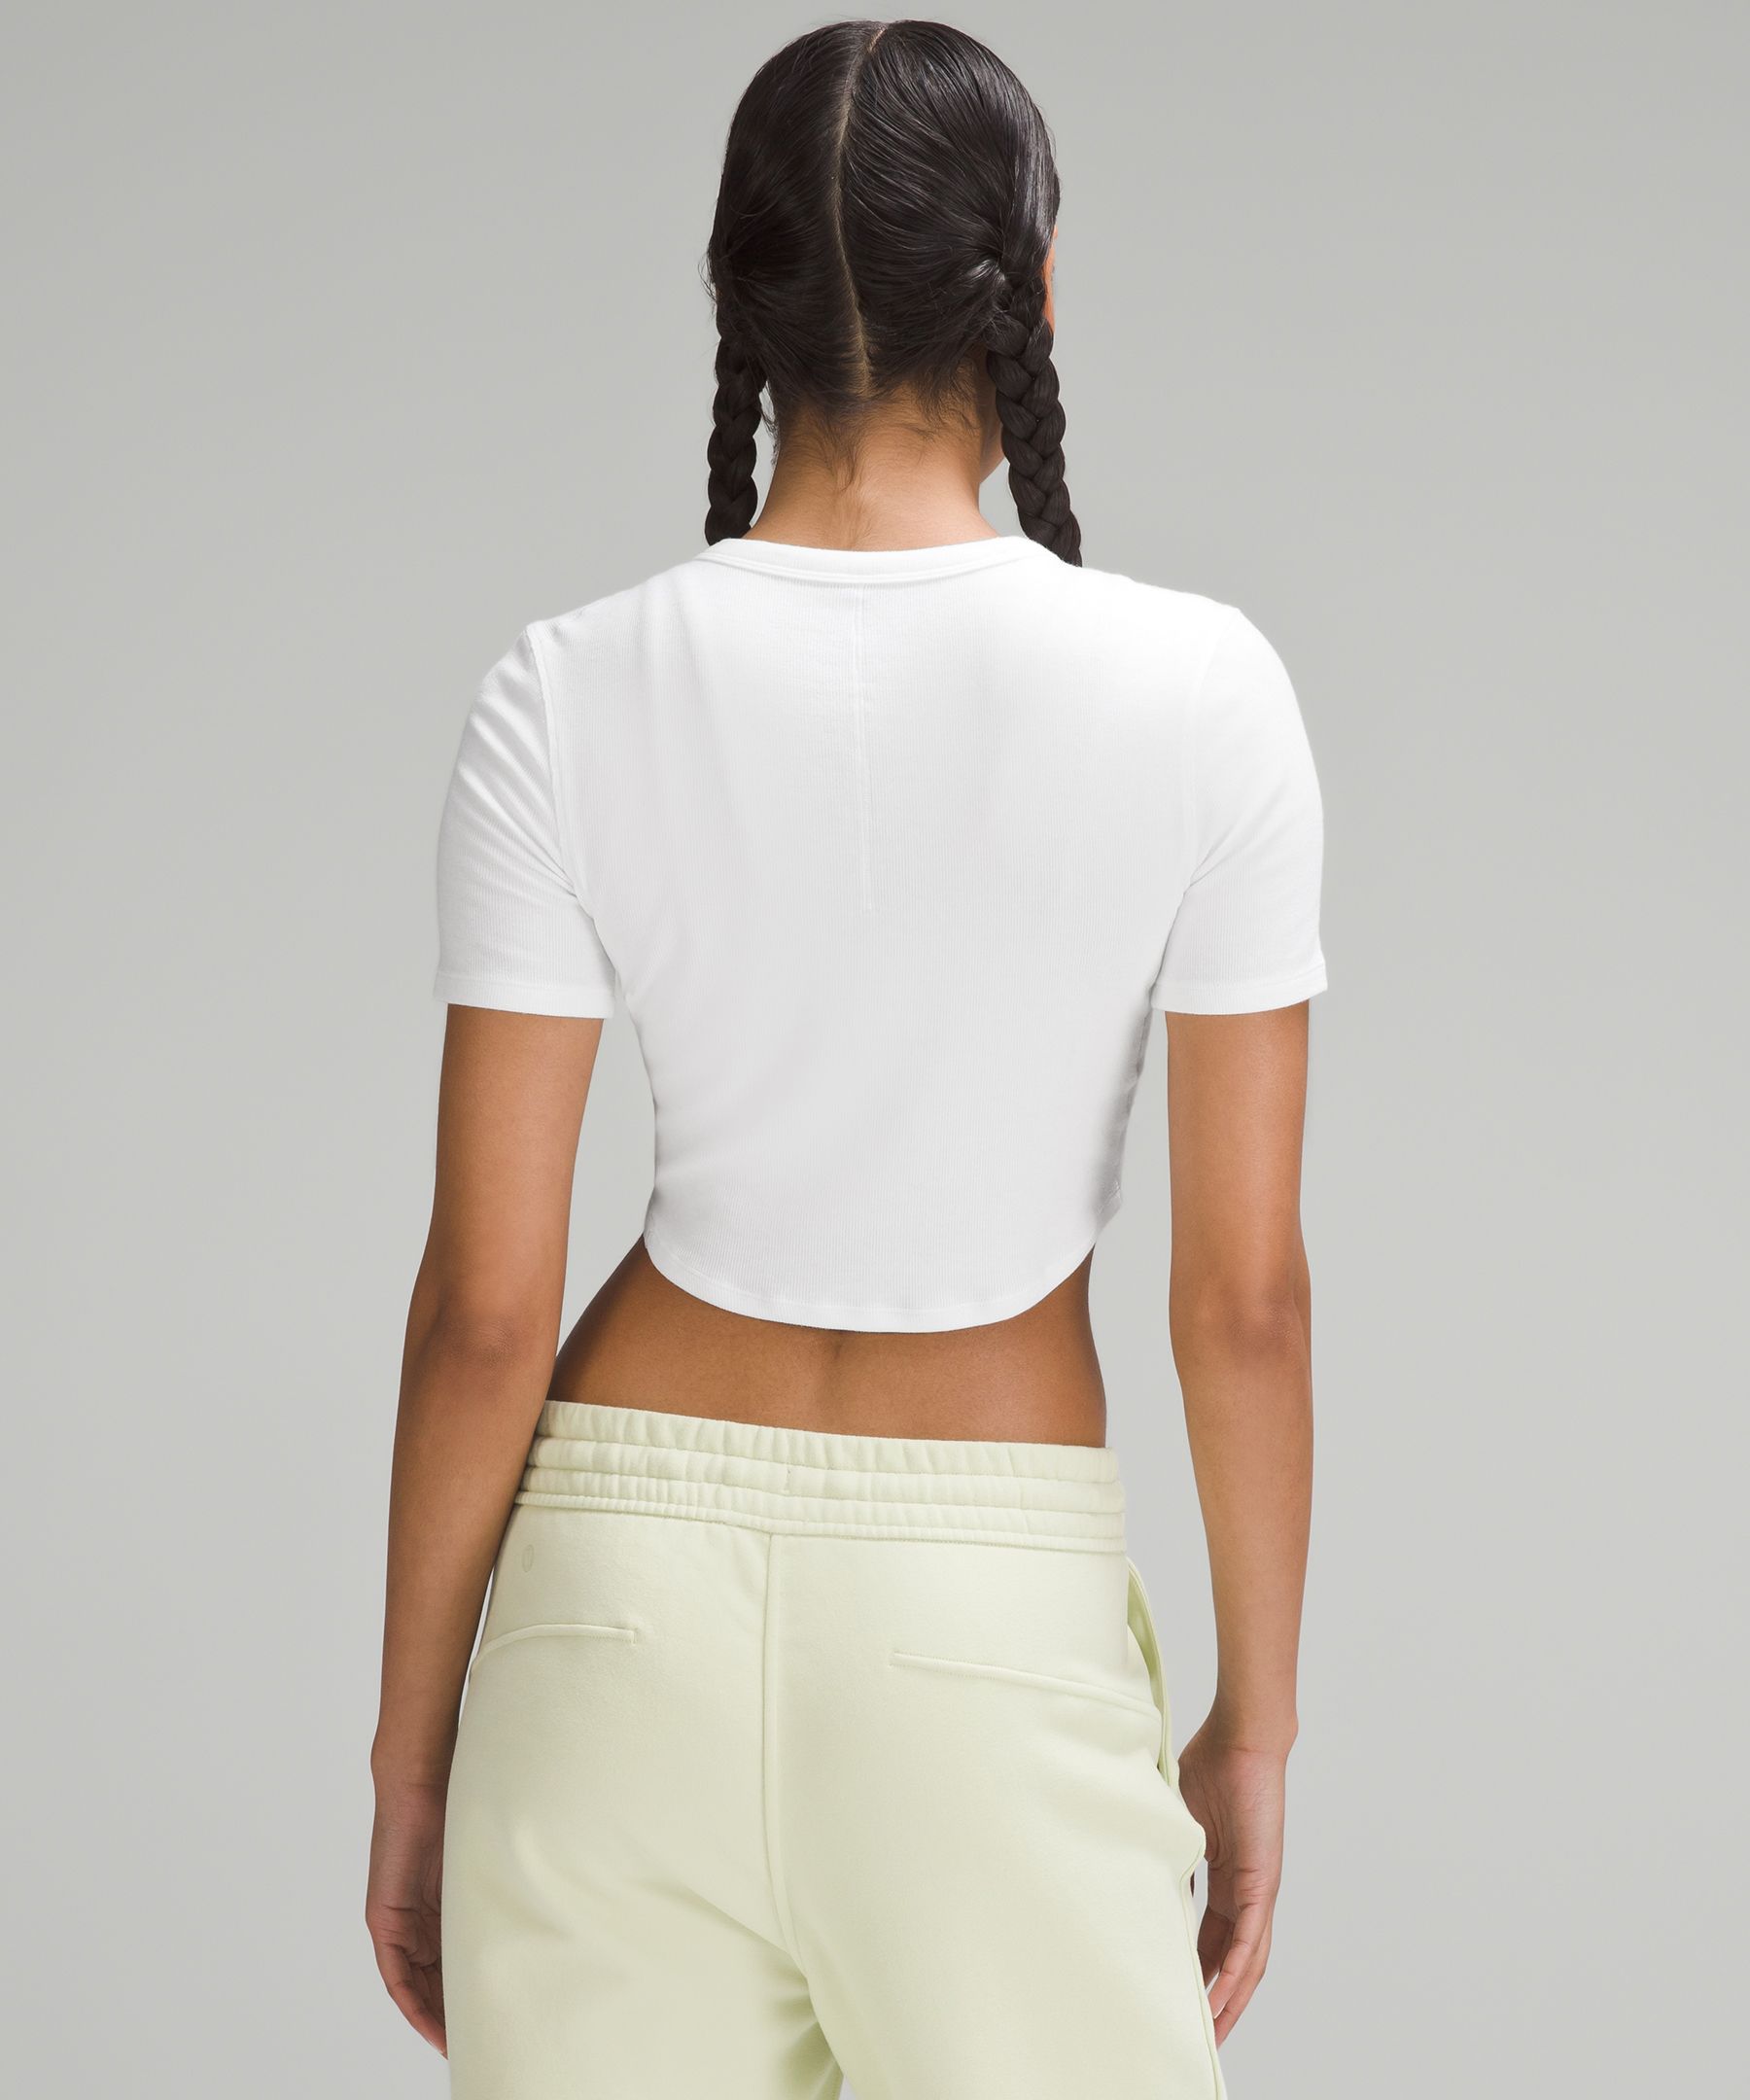 lululemon athletica Hold Tight Cropped Tank Top - Color White